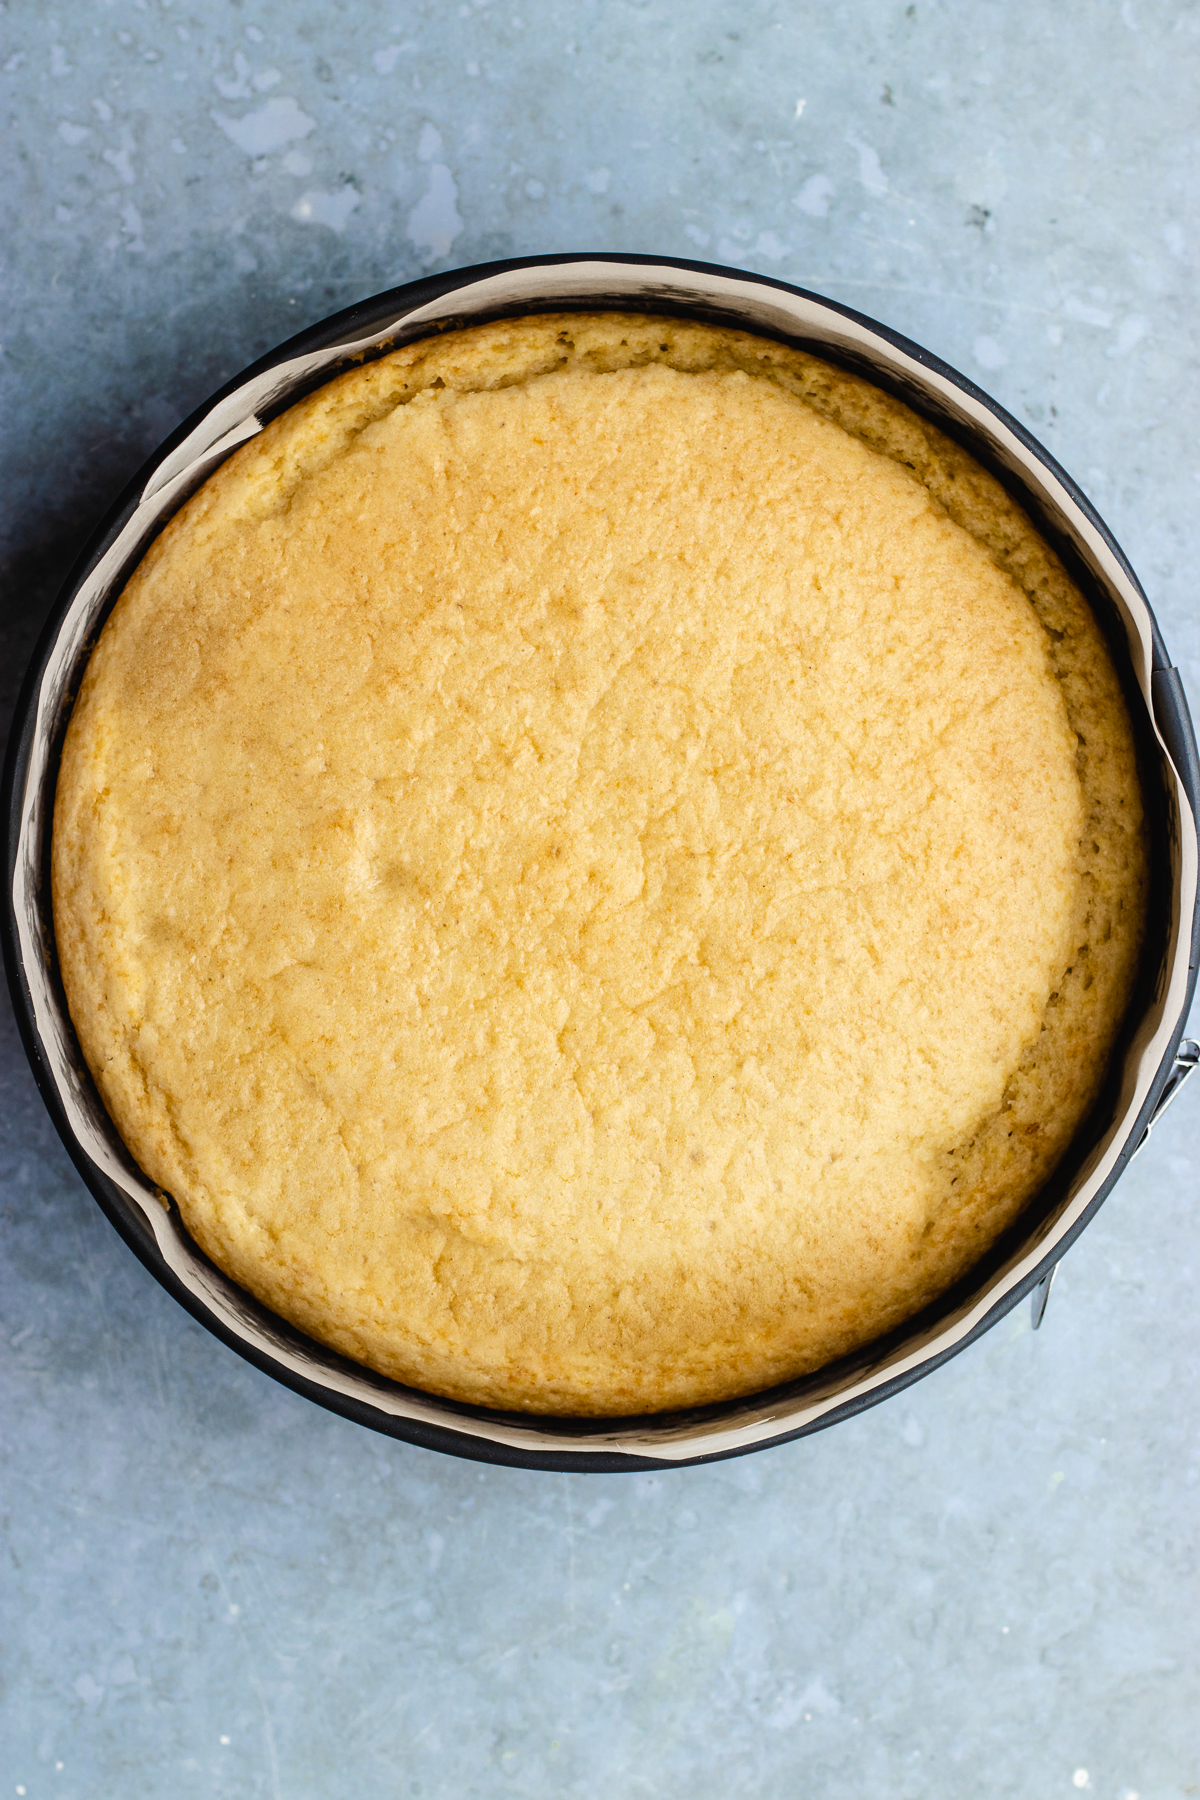 The baked cake in the baking pan.